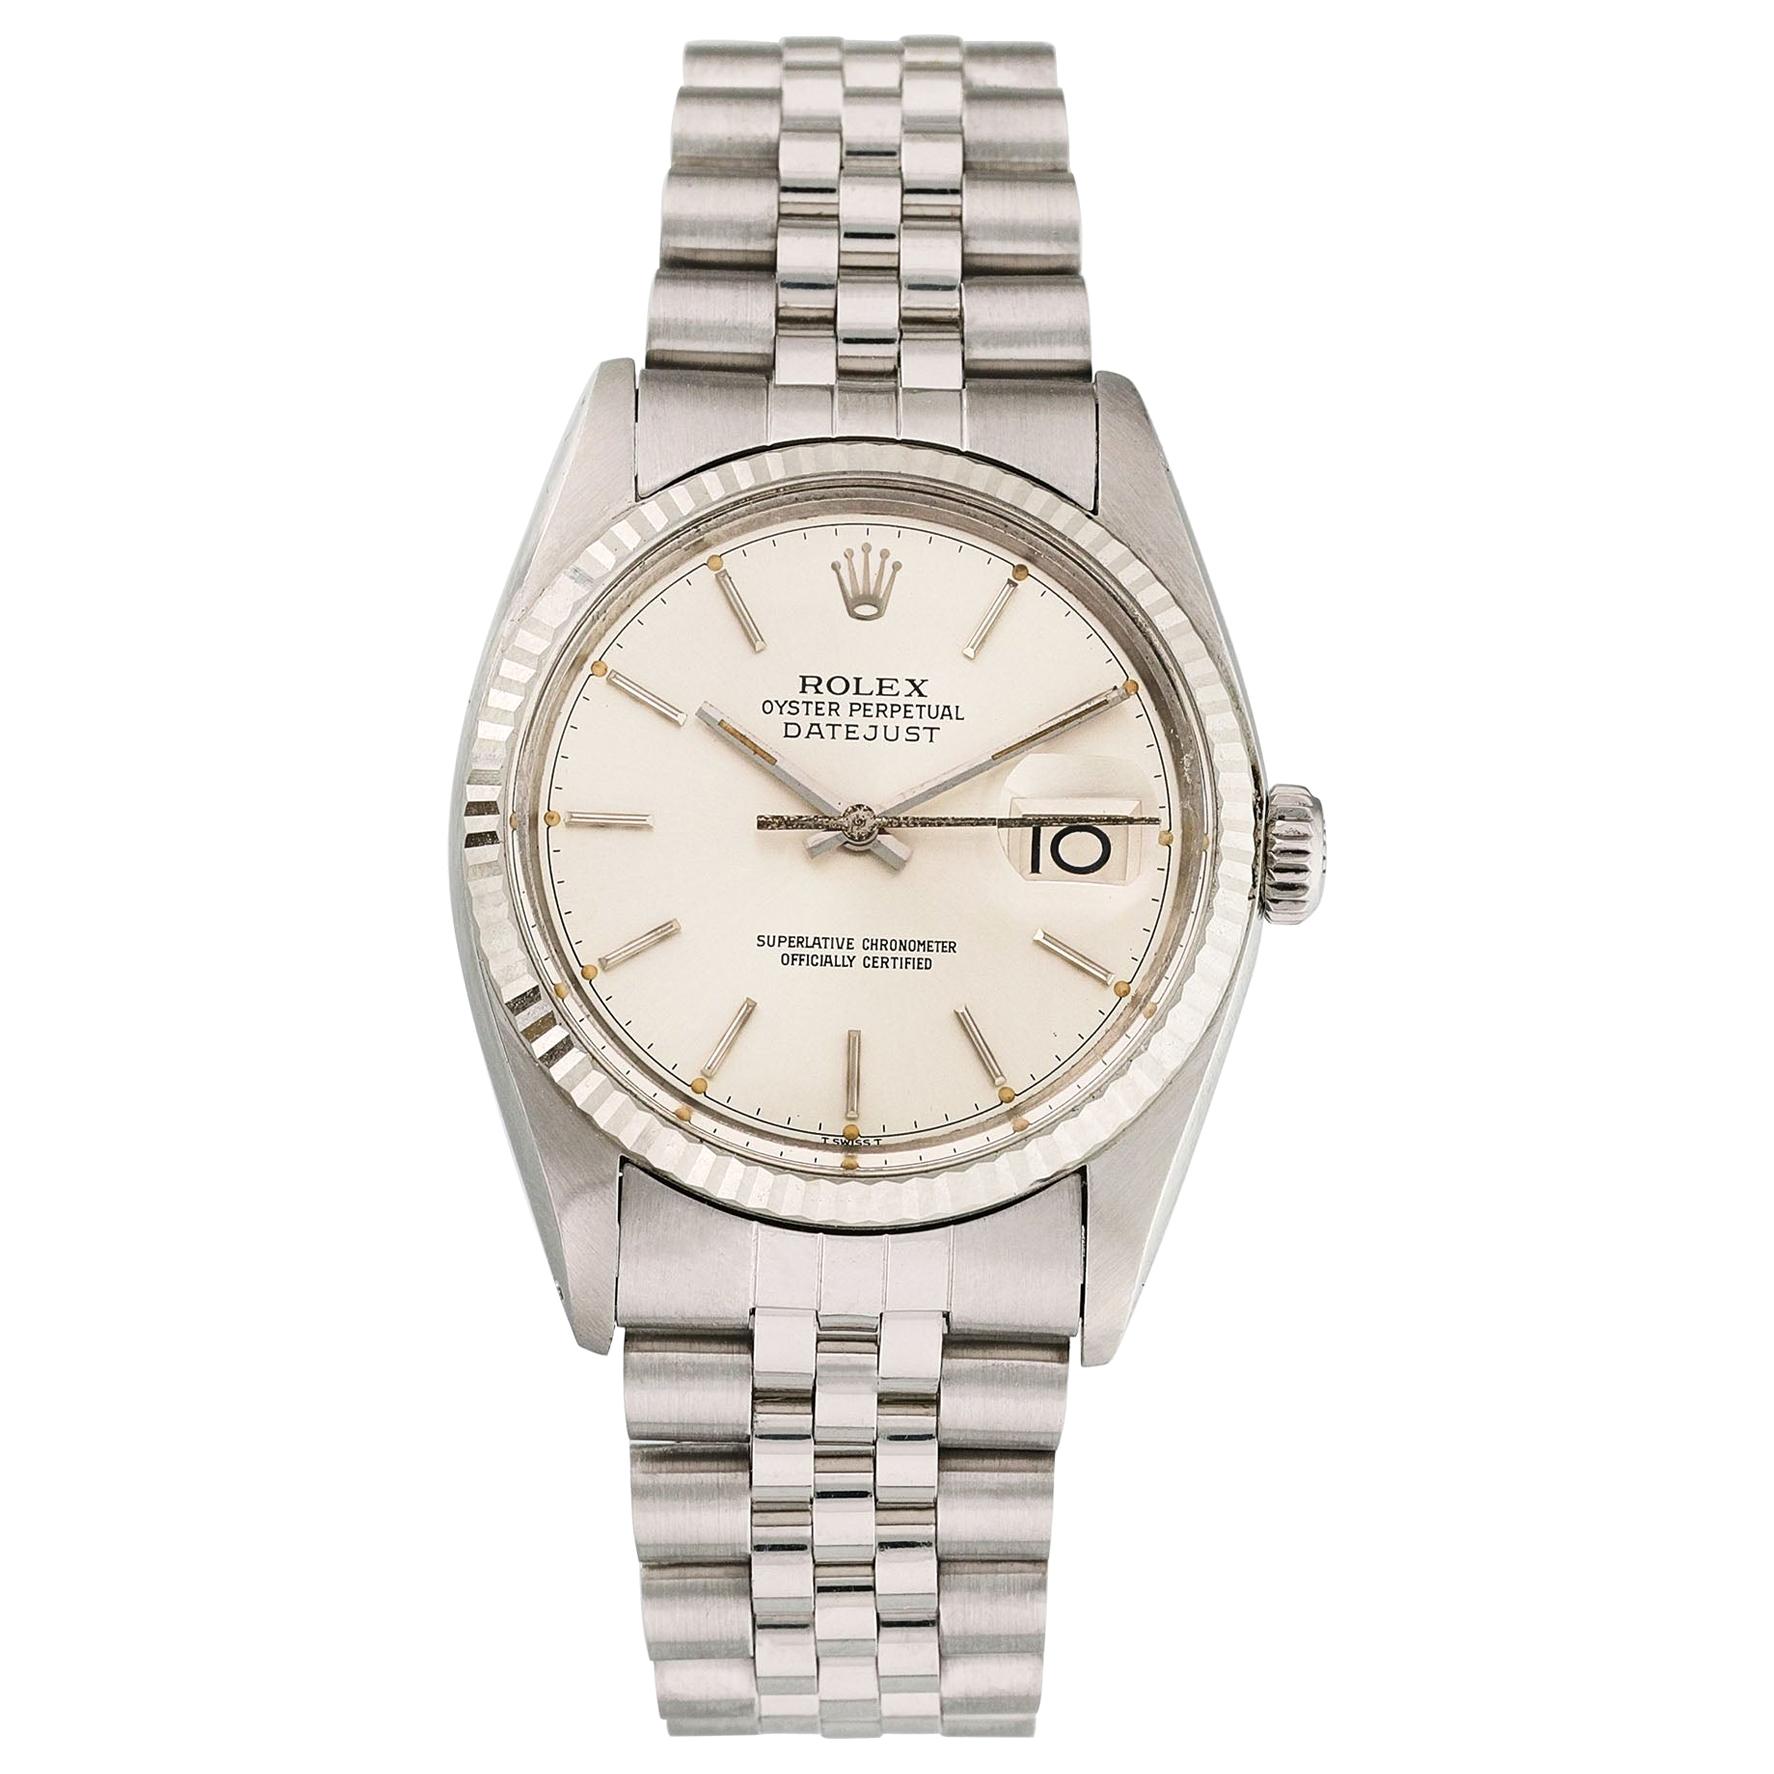 Rolex Datejust 16014 Men's Watch Box Papers For Sale